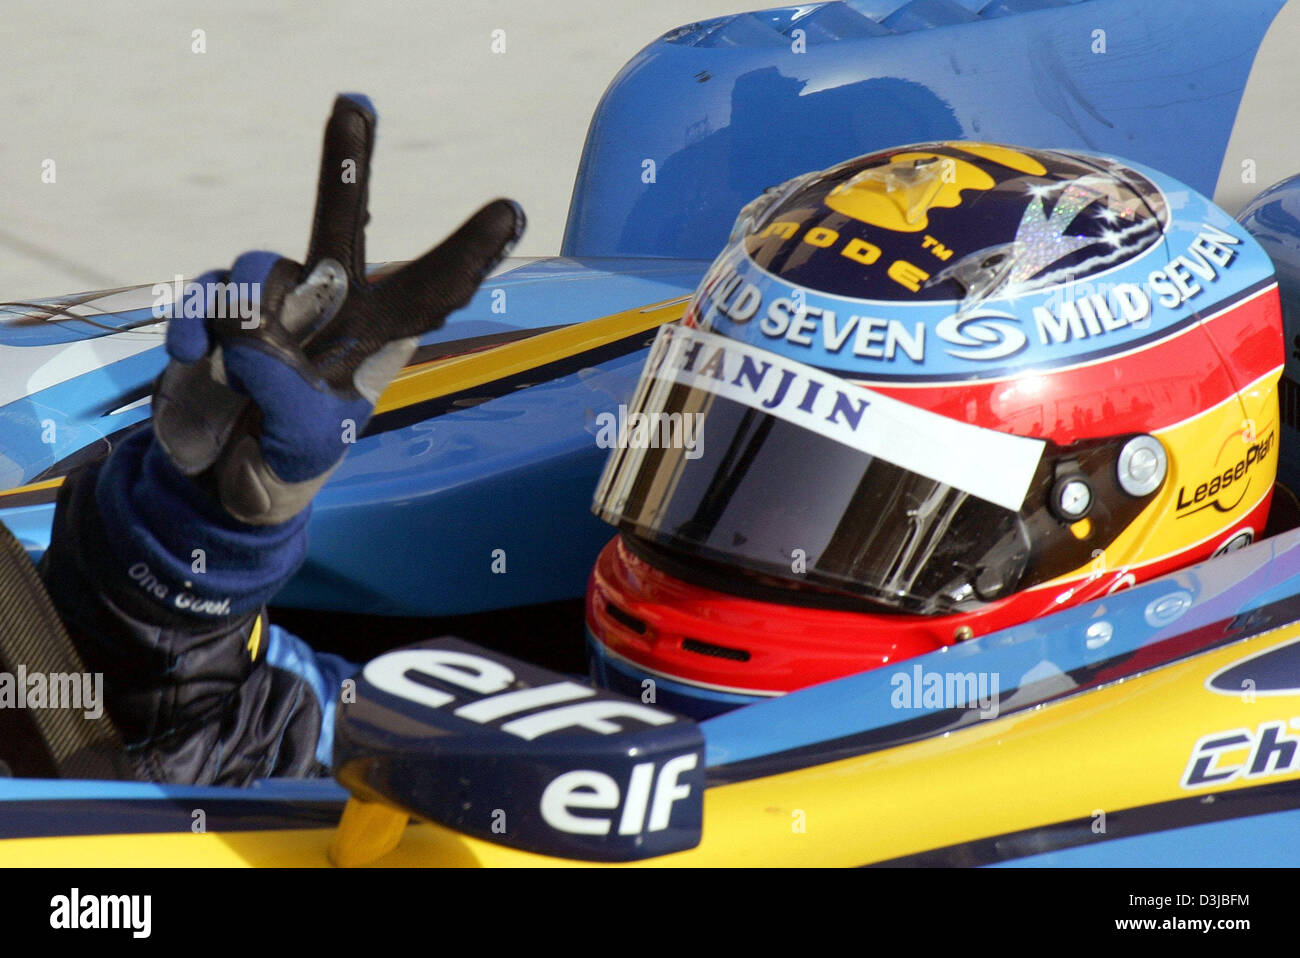 dpa) - Spanish Formula One driver Fernando Alonso (Renault) pictured after  winning the Grand Prix of Bahrain at the Formula One track near Manama,  Bahrain, 3 April 2005 Stock Photo - Alamy